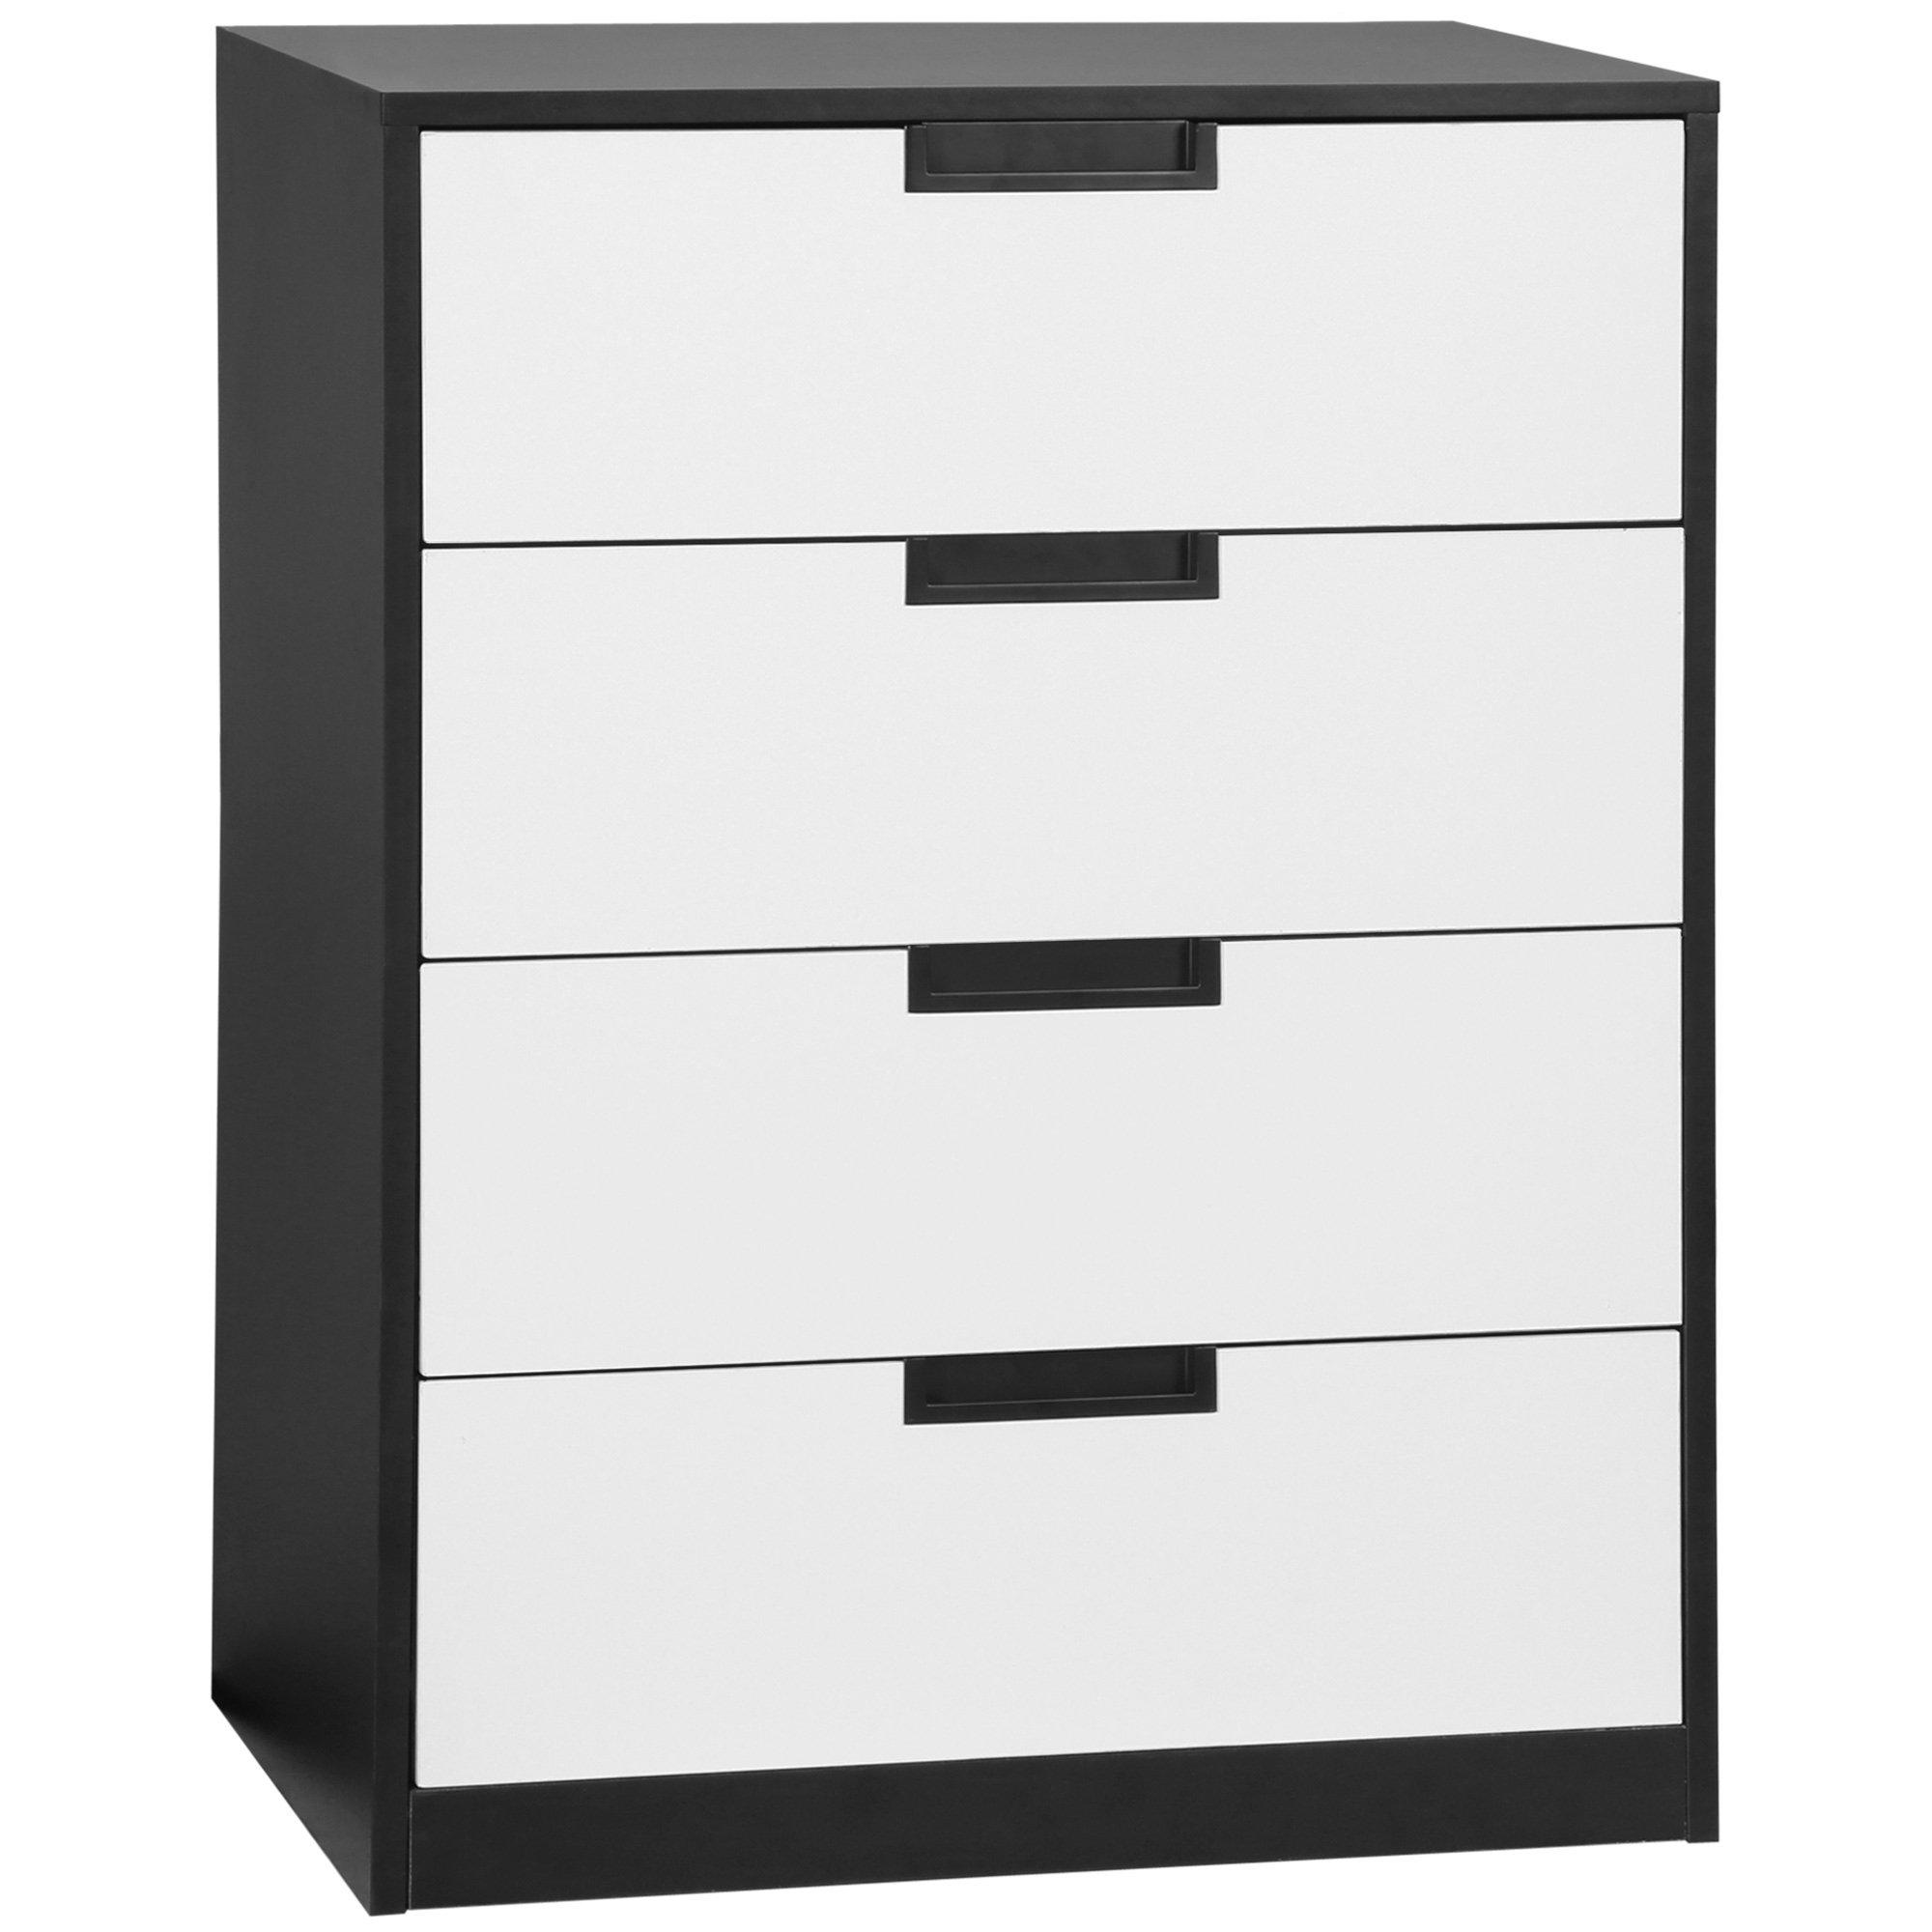 Chest of Drawers 4 Drawers Cabinet Organiser Unit with Handles